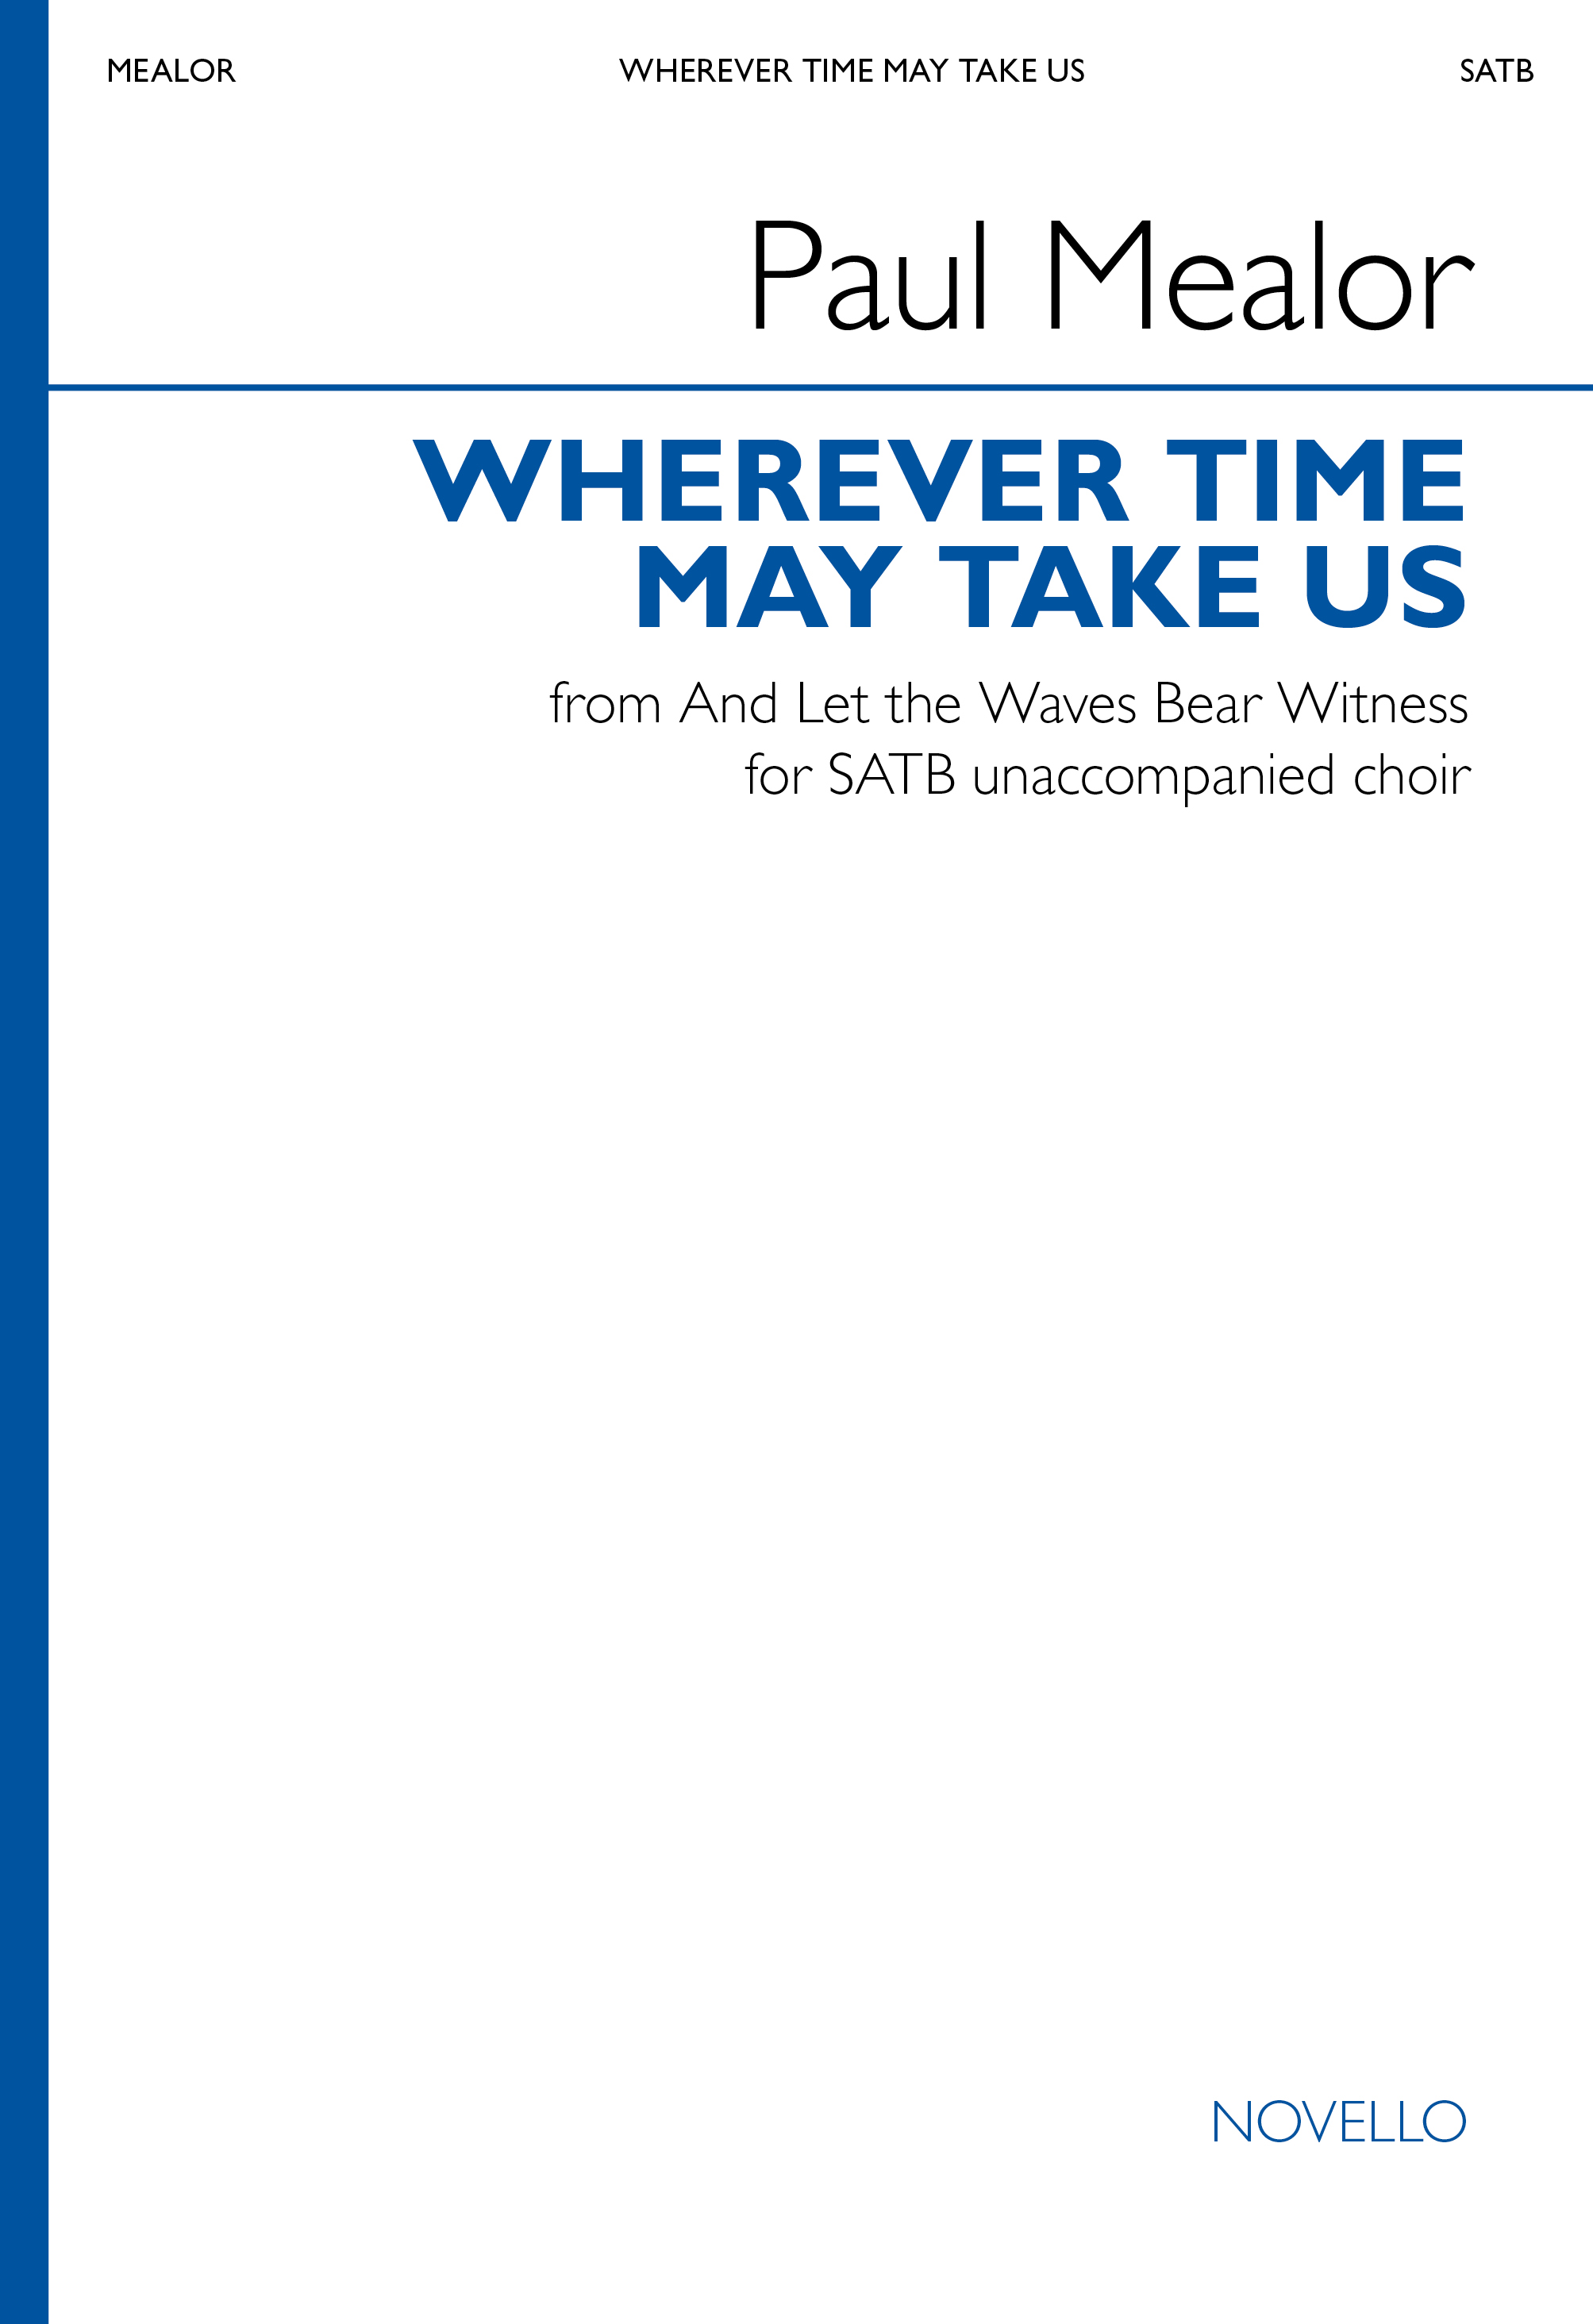 Paul Mealor: Wherever Time May Take Us: Mixed Choir and Accomp.: Choral Score